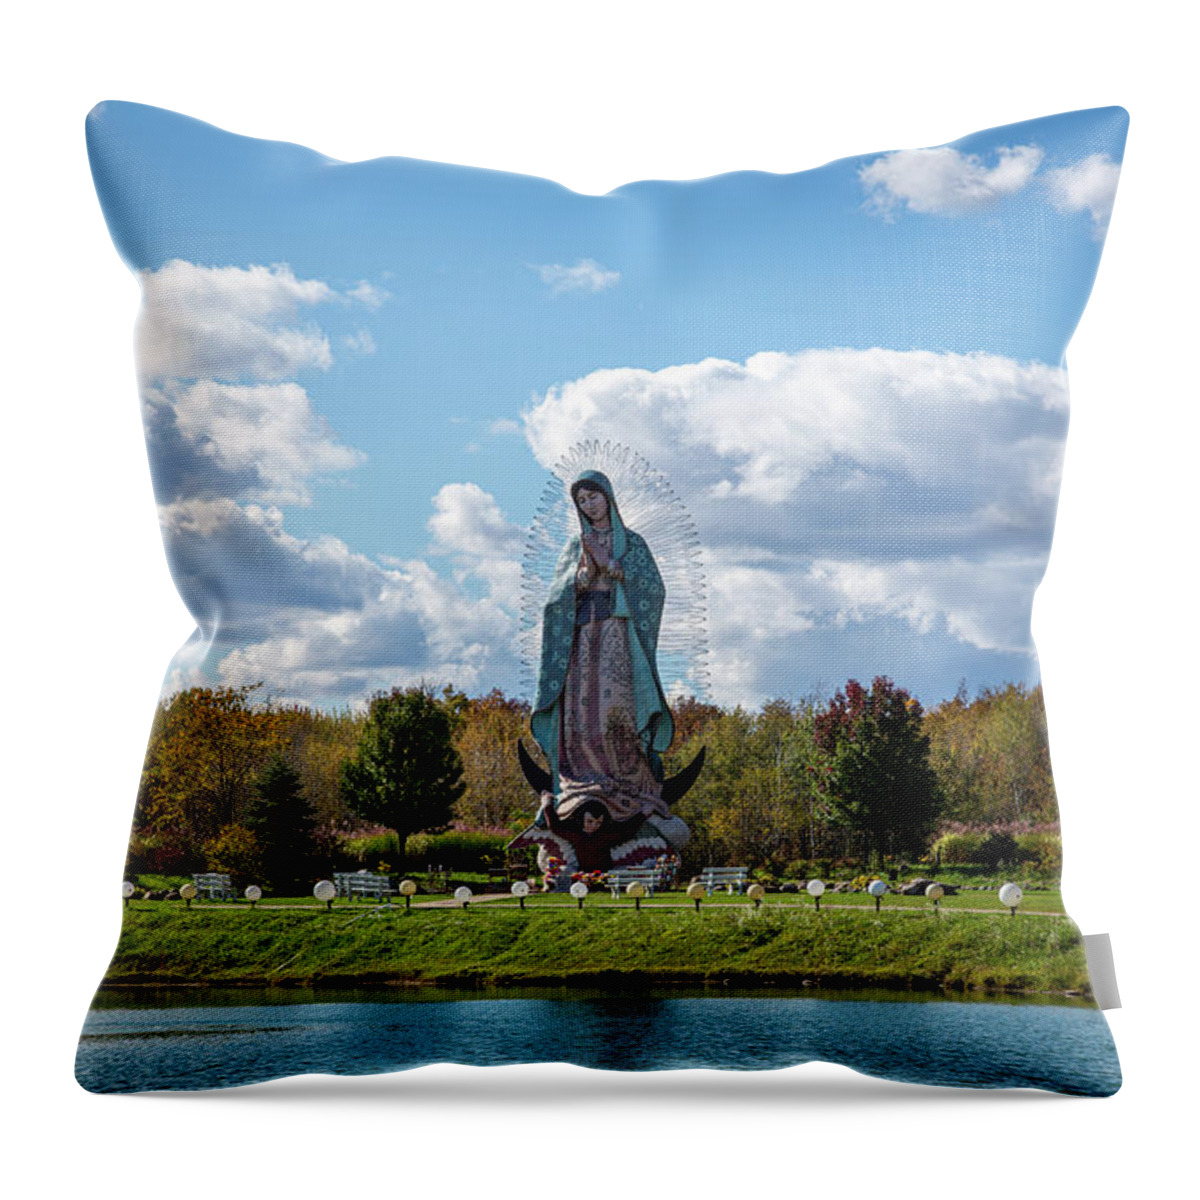 Lake Hope Throw Pillow featuring the photograph Lake Hope With Statue of Mary by Dale Kincaid